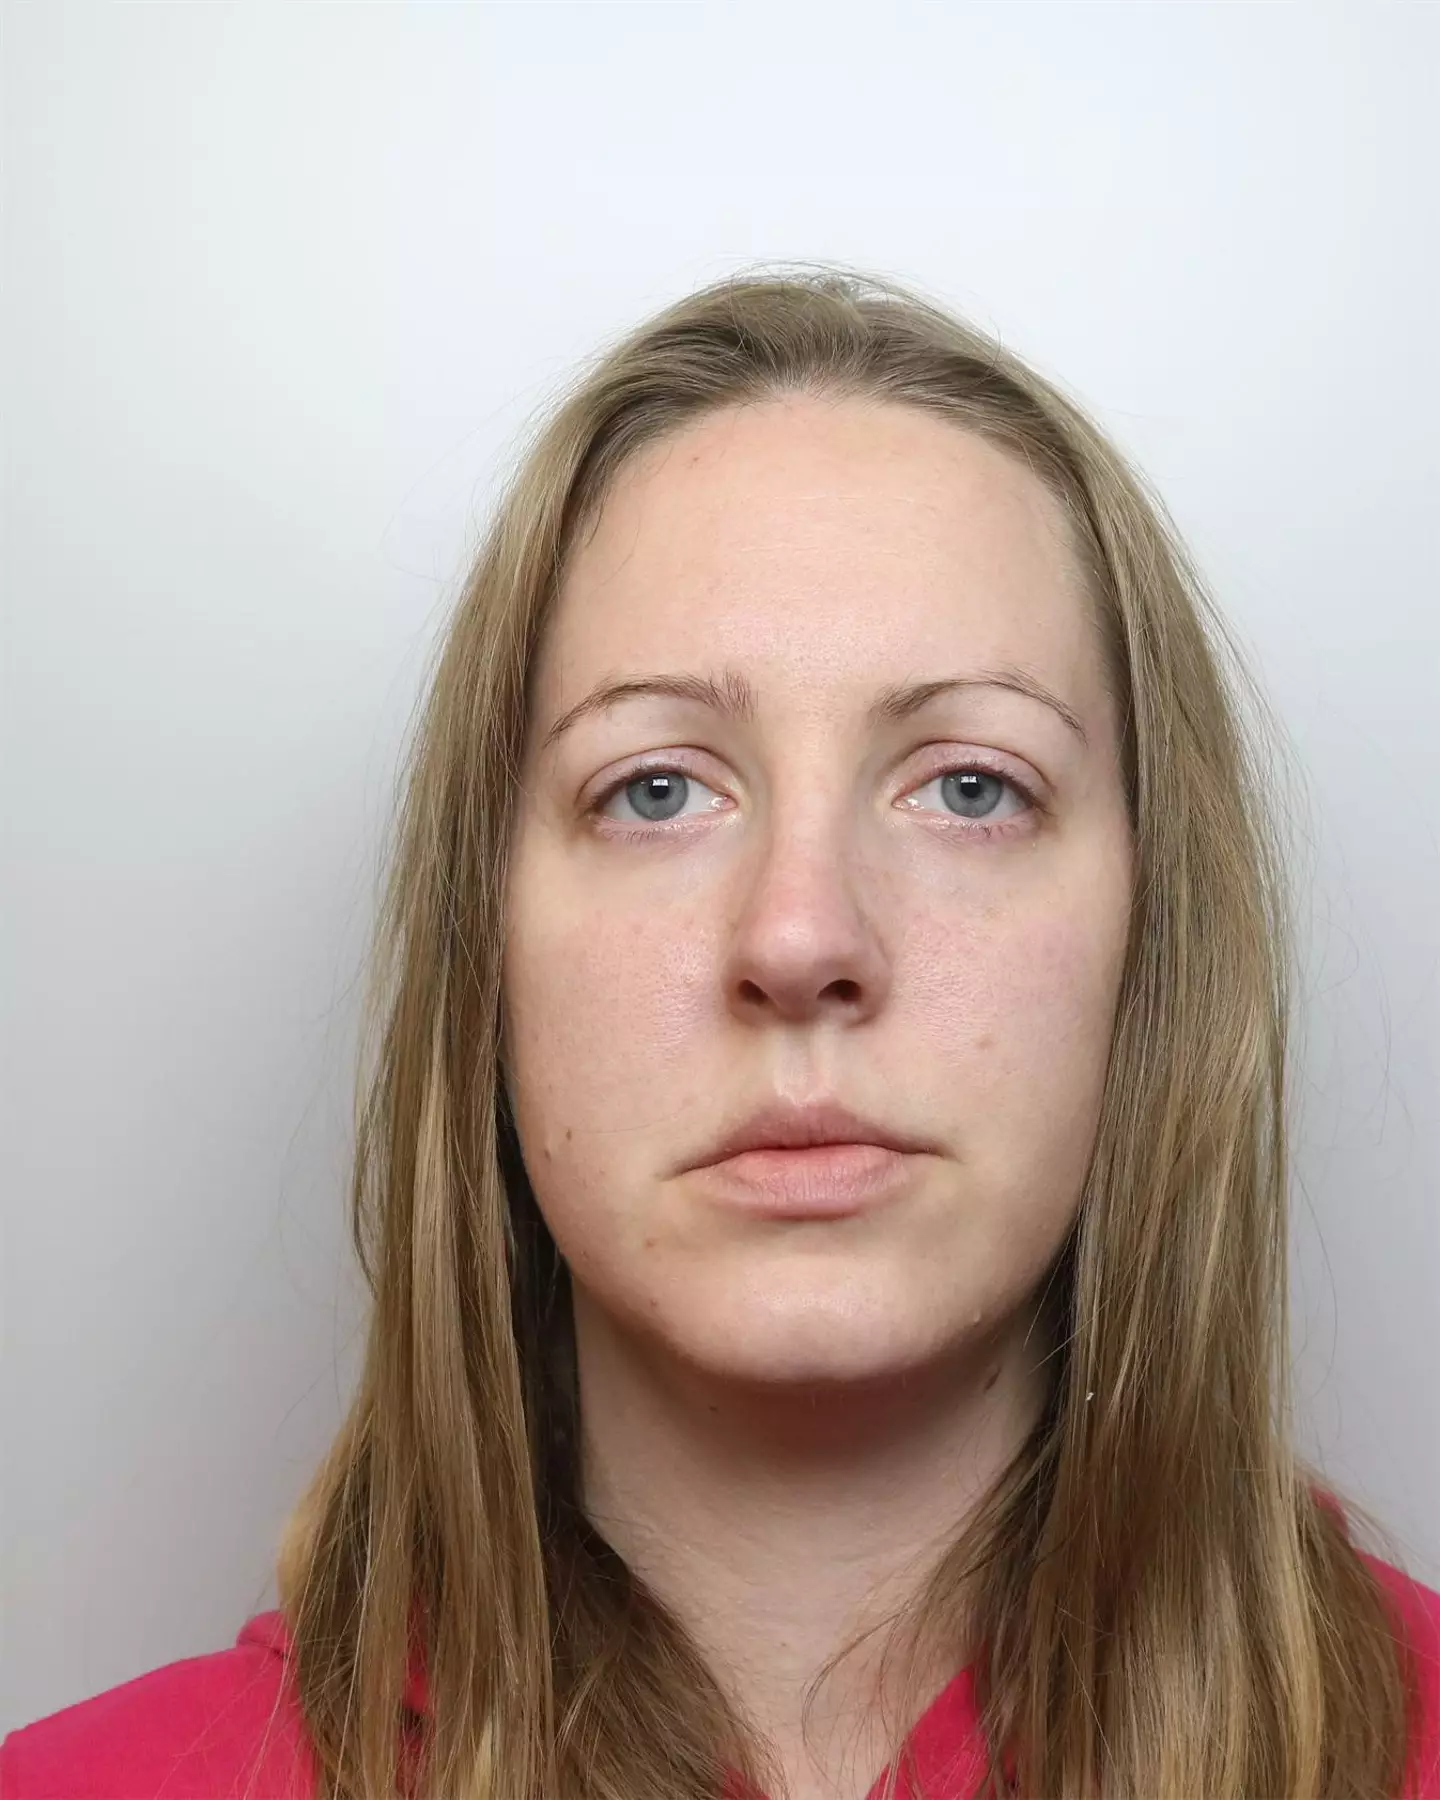 Lucy Letby was convicted in August this year.